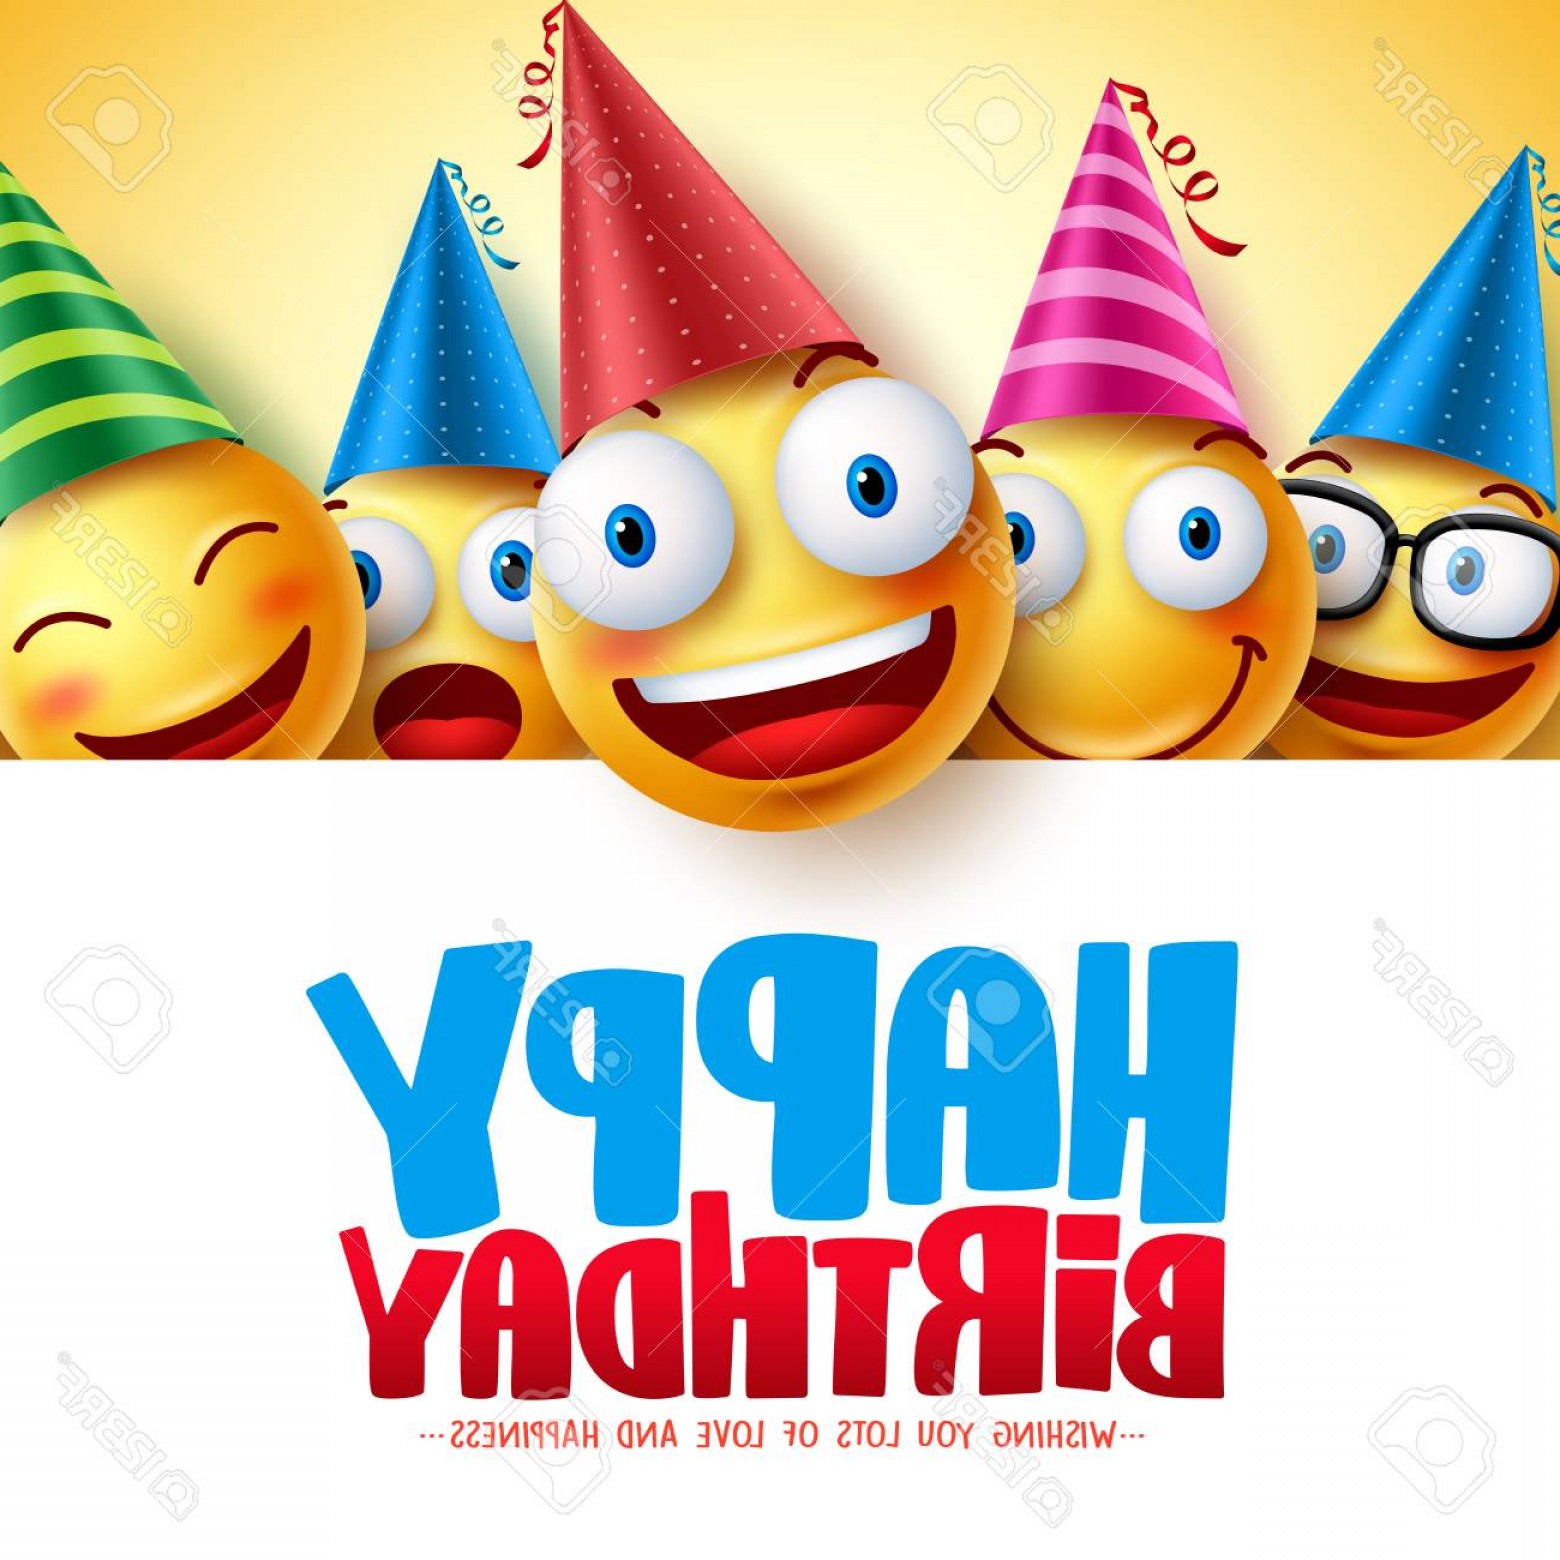 Birthday Vector Images at Vectorified.com | Collection of Birthday ...